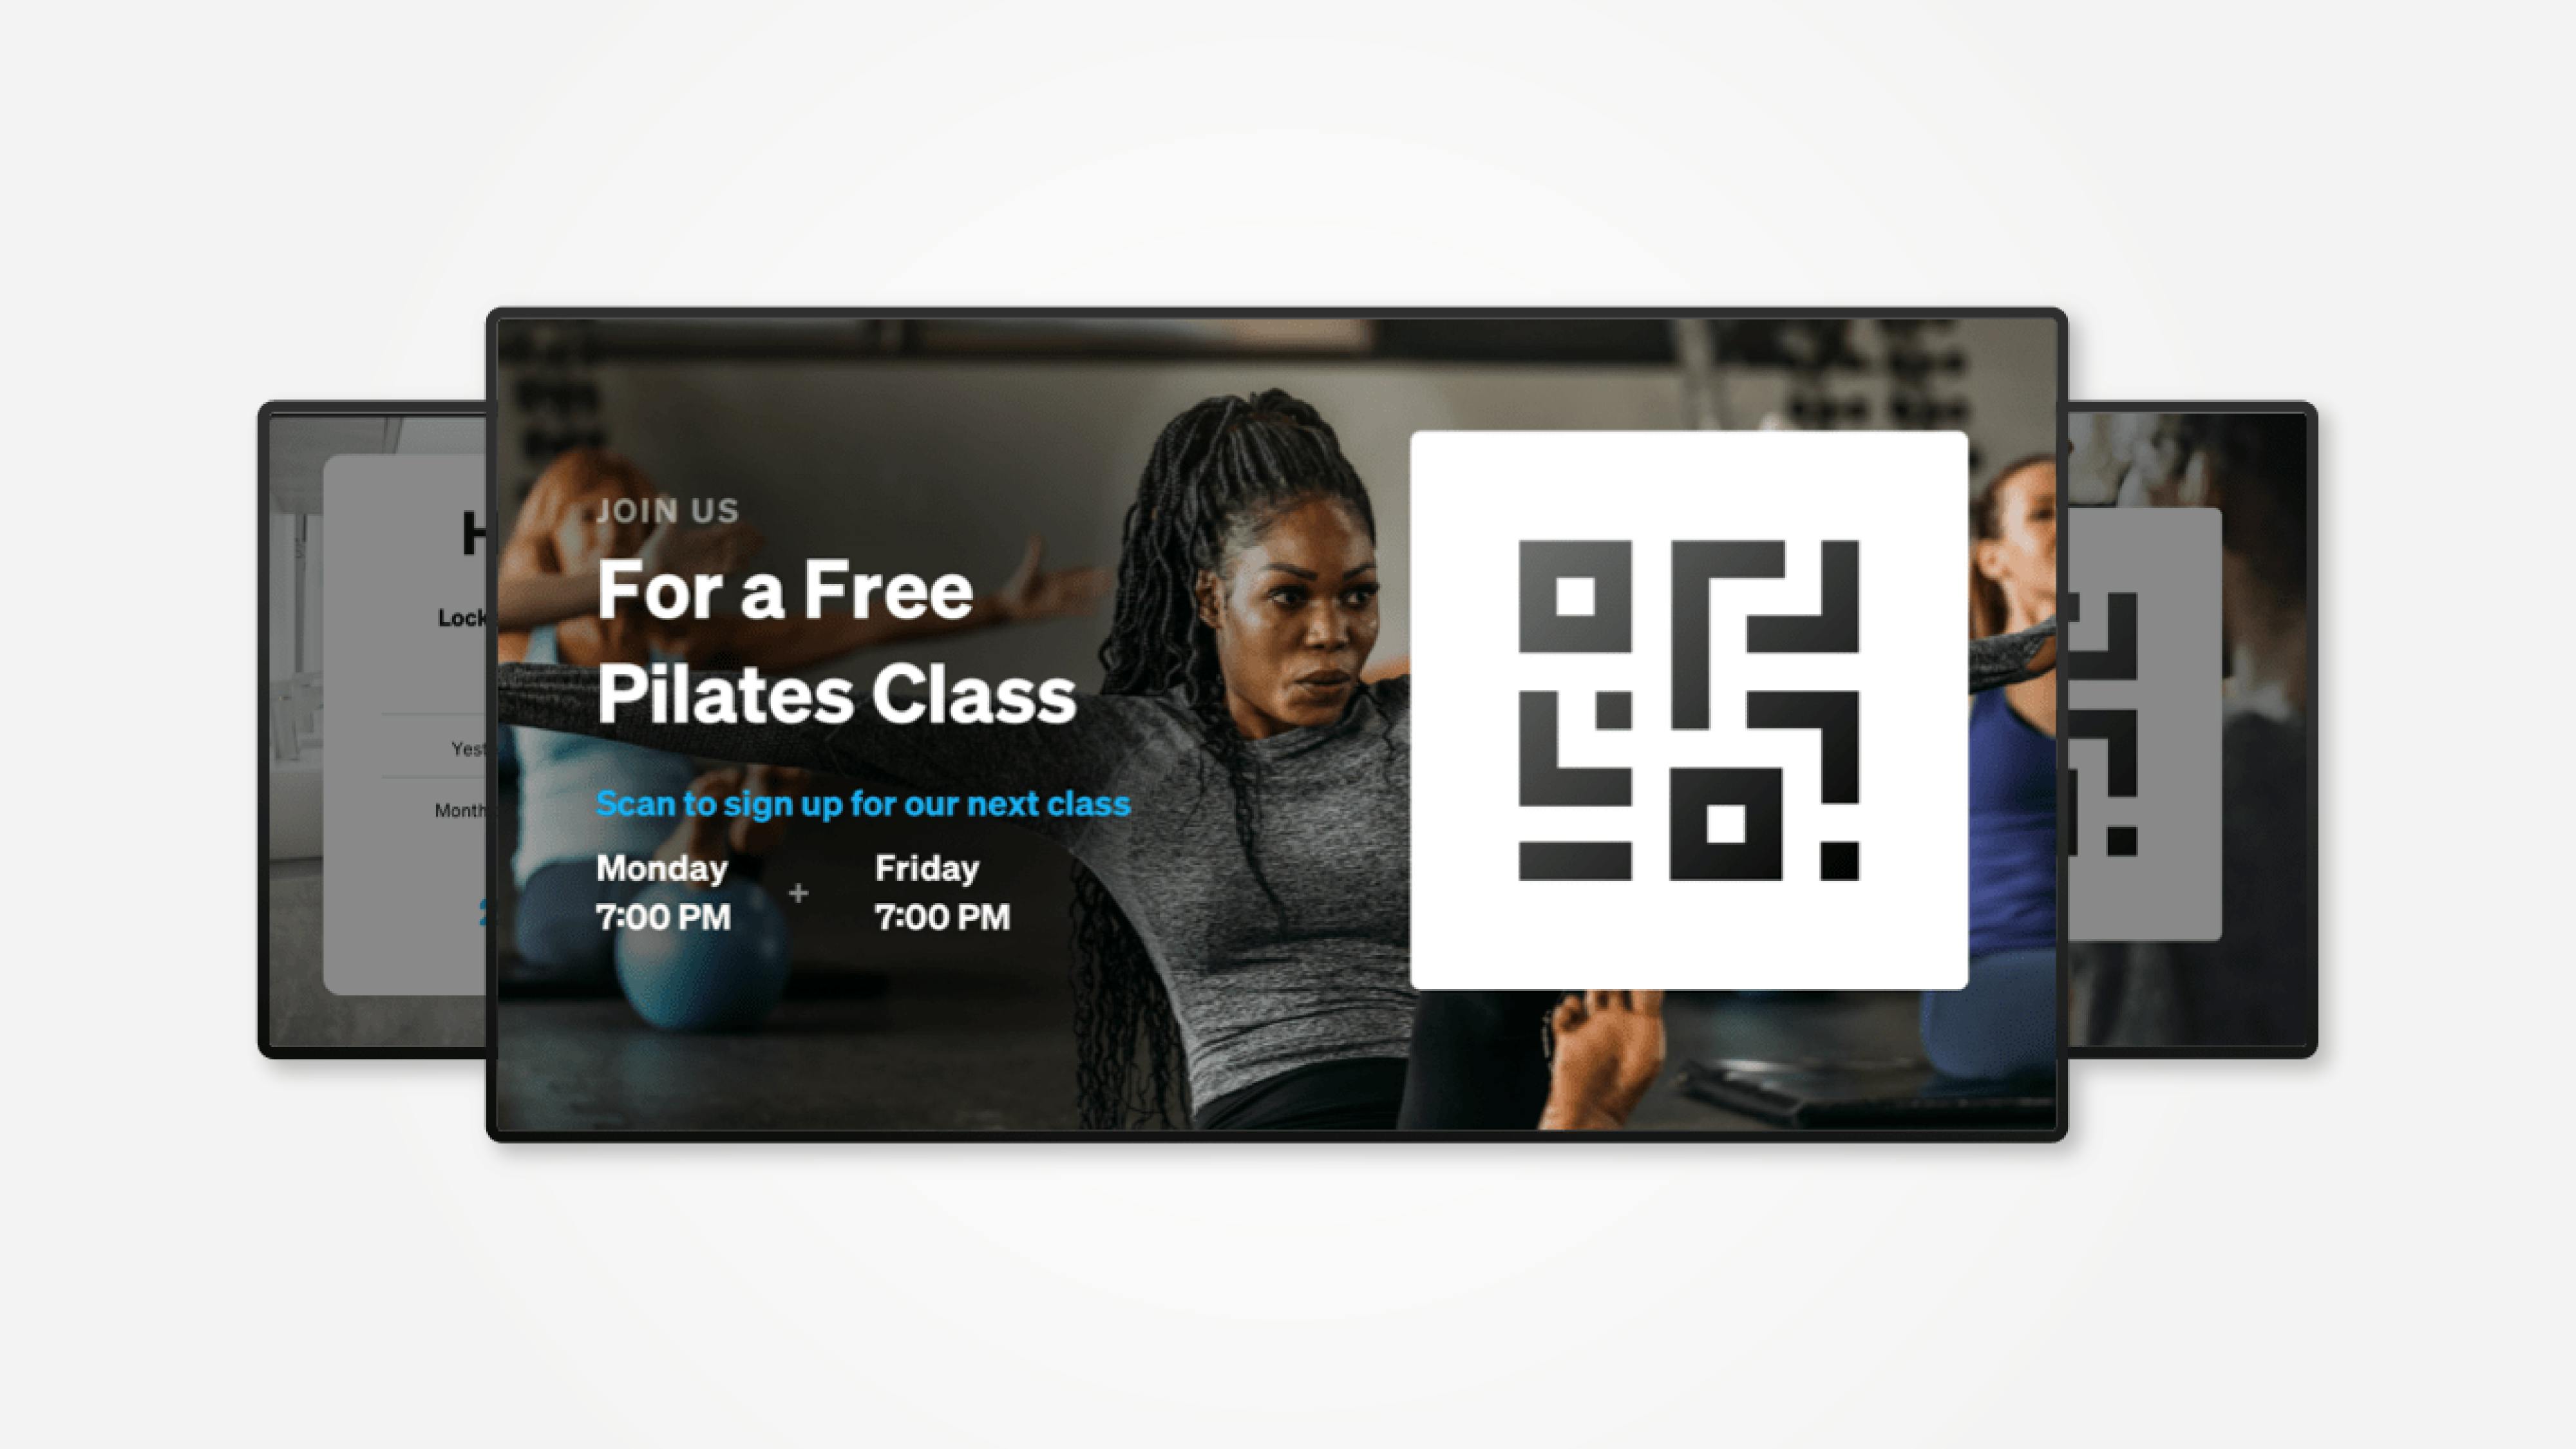 Kiosk app in action showing a Pilates class and QR code.